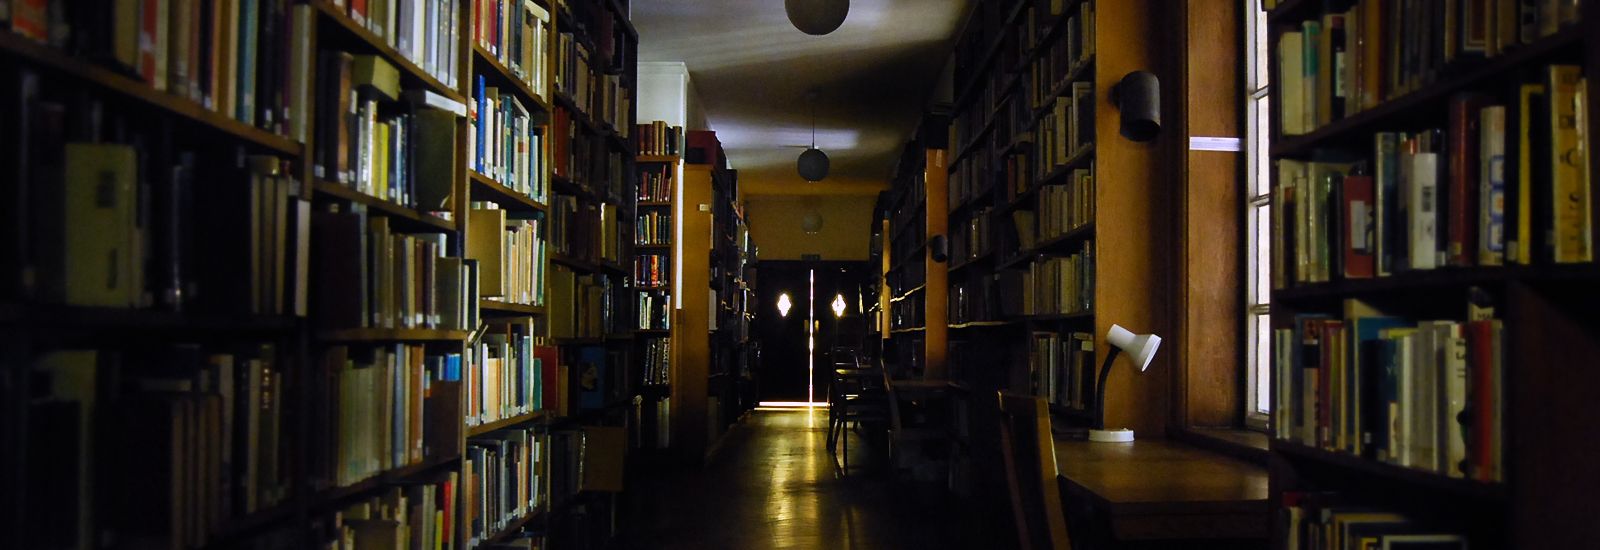 Inside a dark library with sunlight coming through the windows